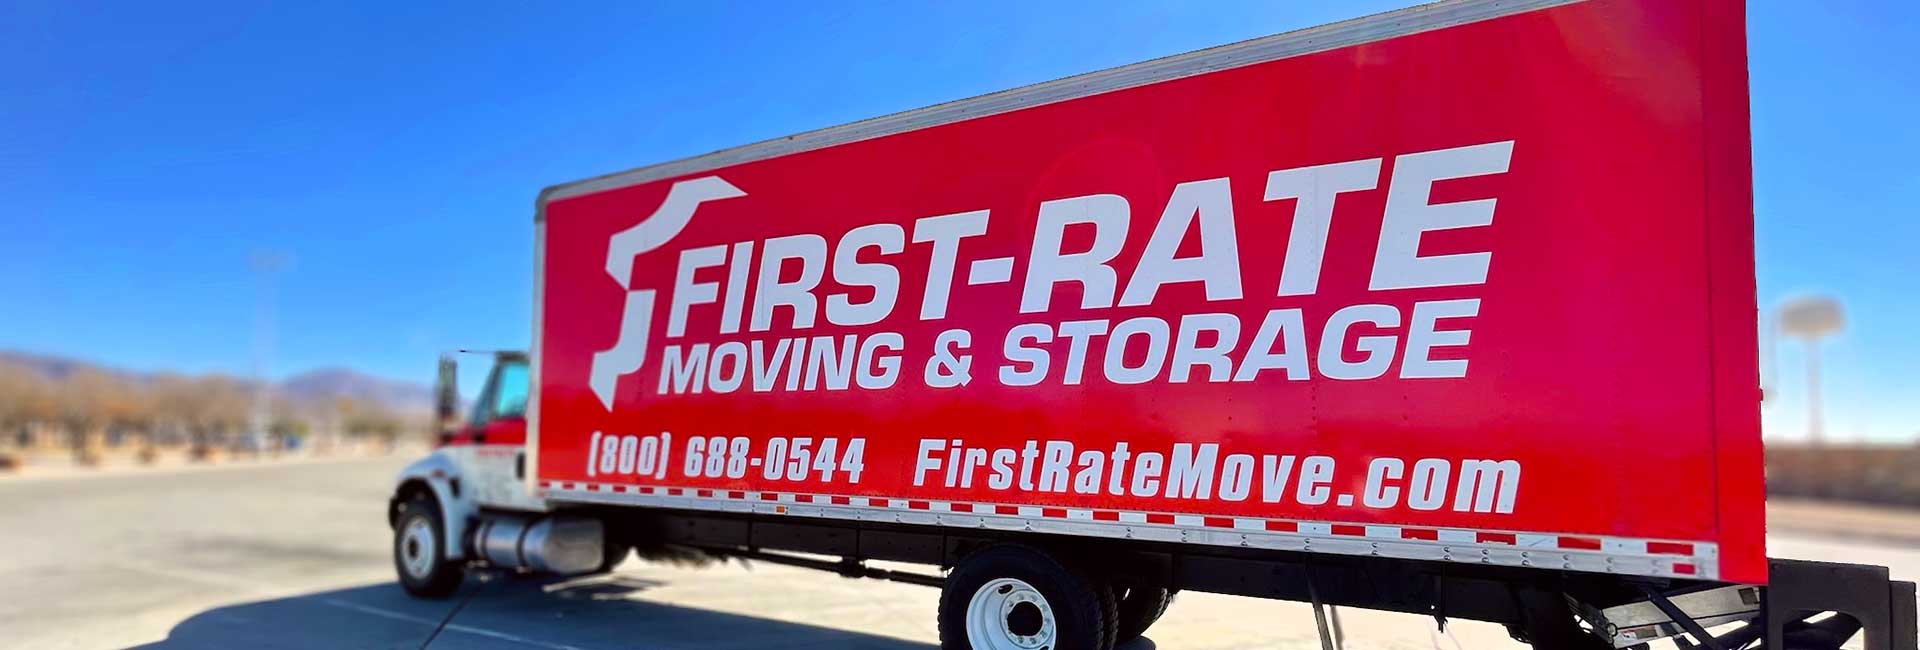 Local Movers Moving truck